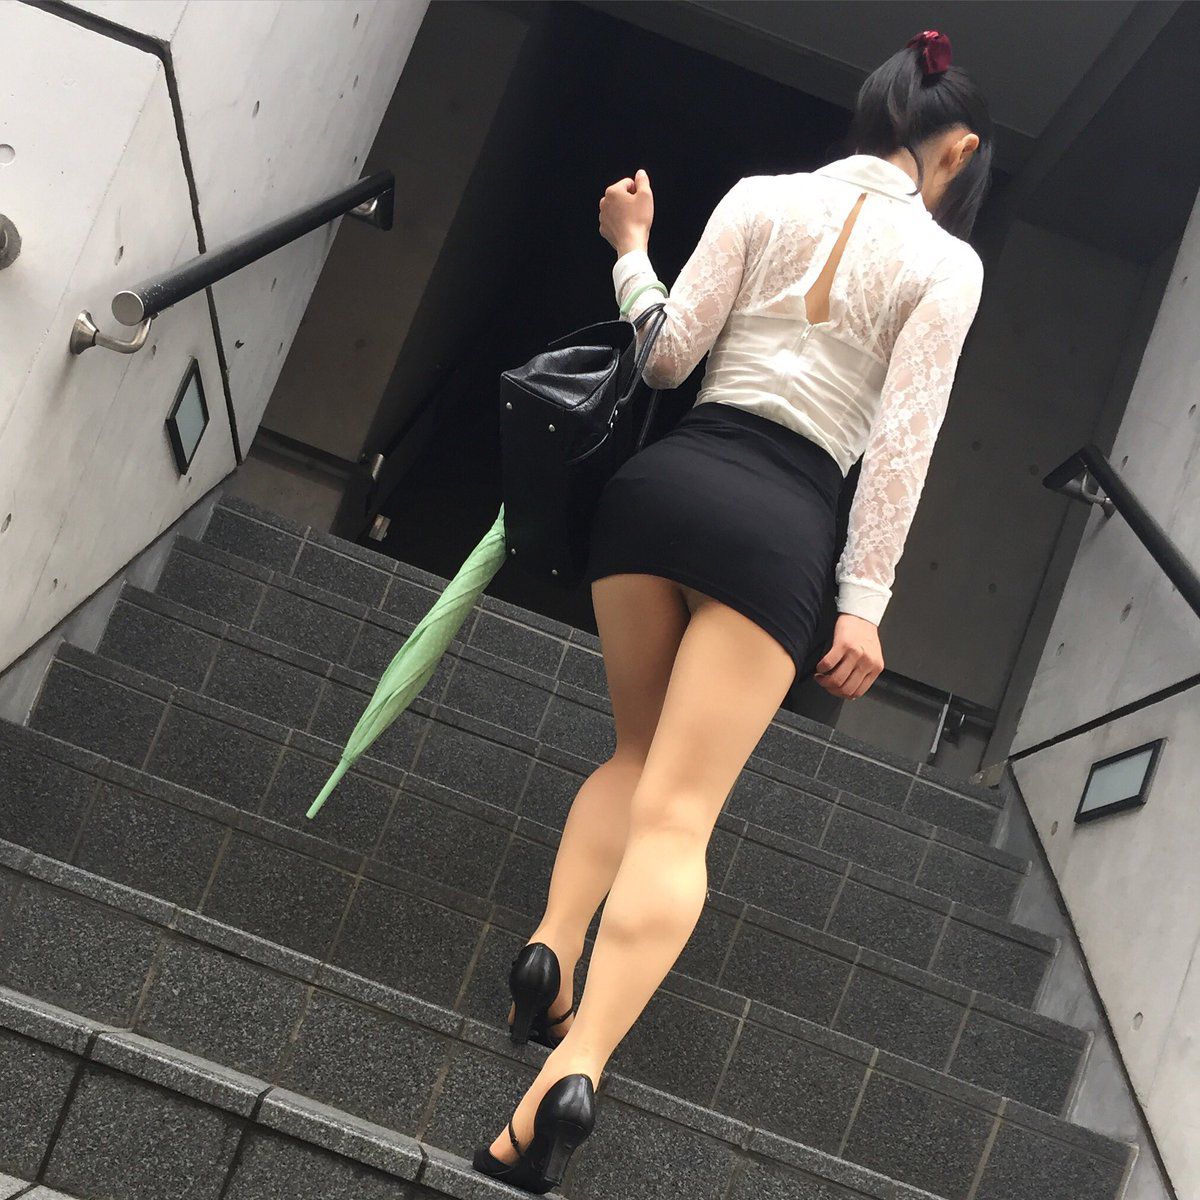 Chinese chick getting fucked near stairs photo